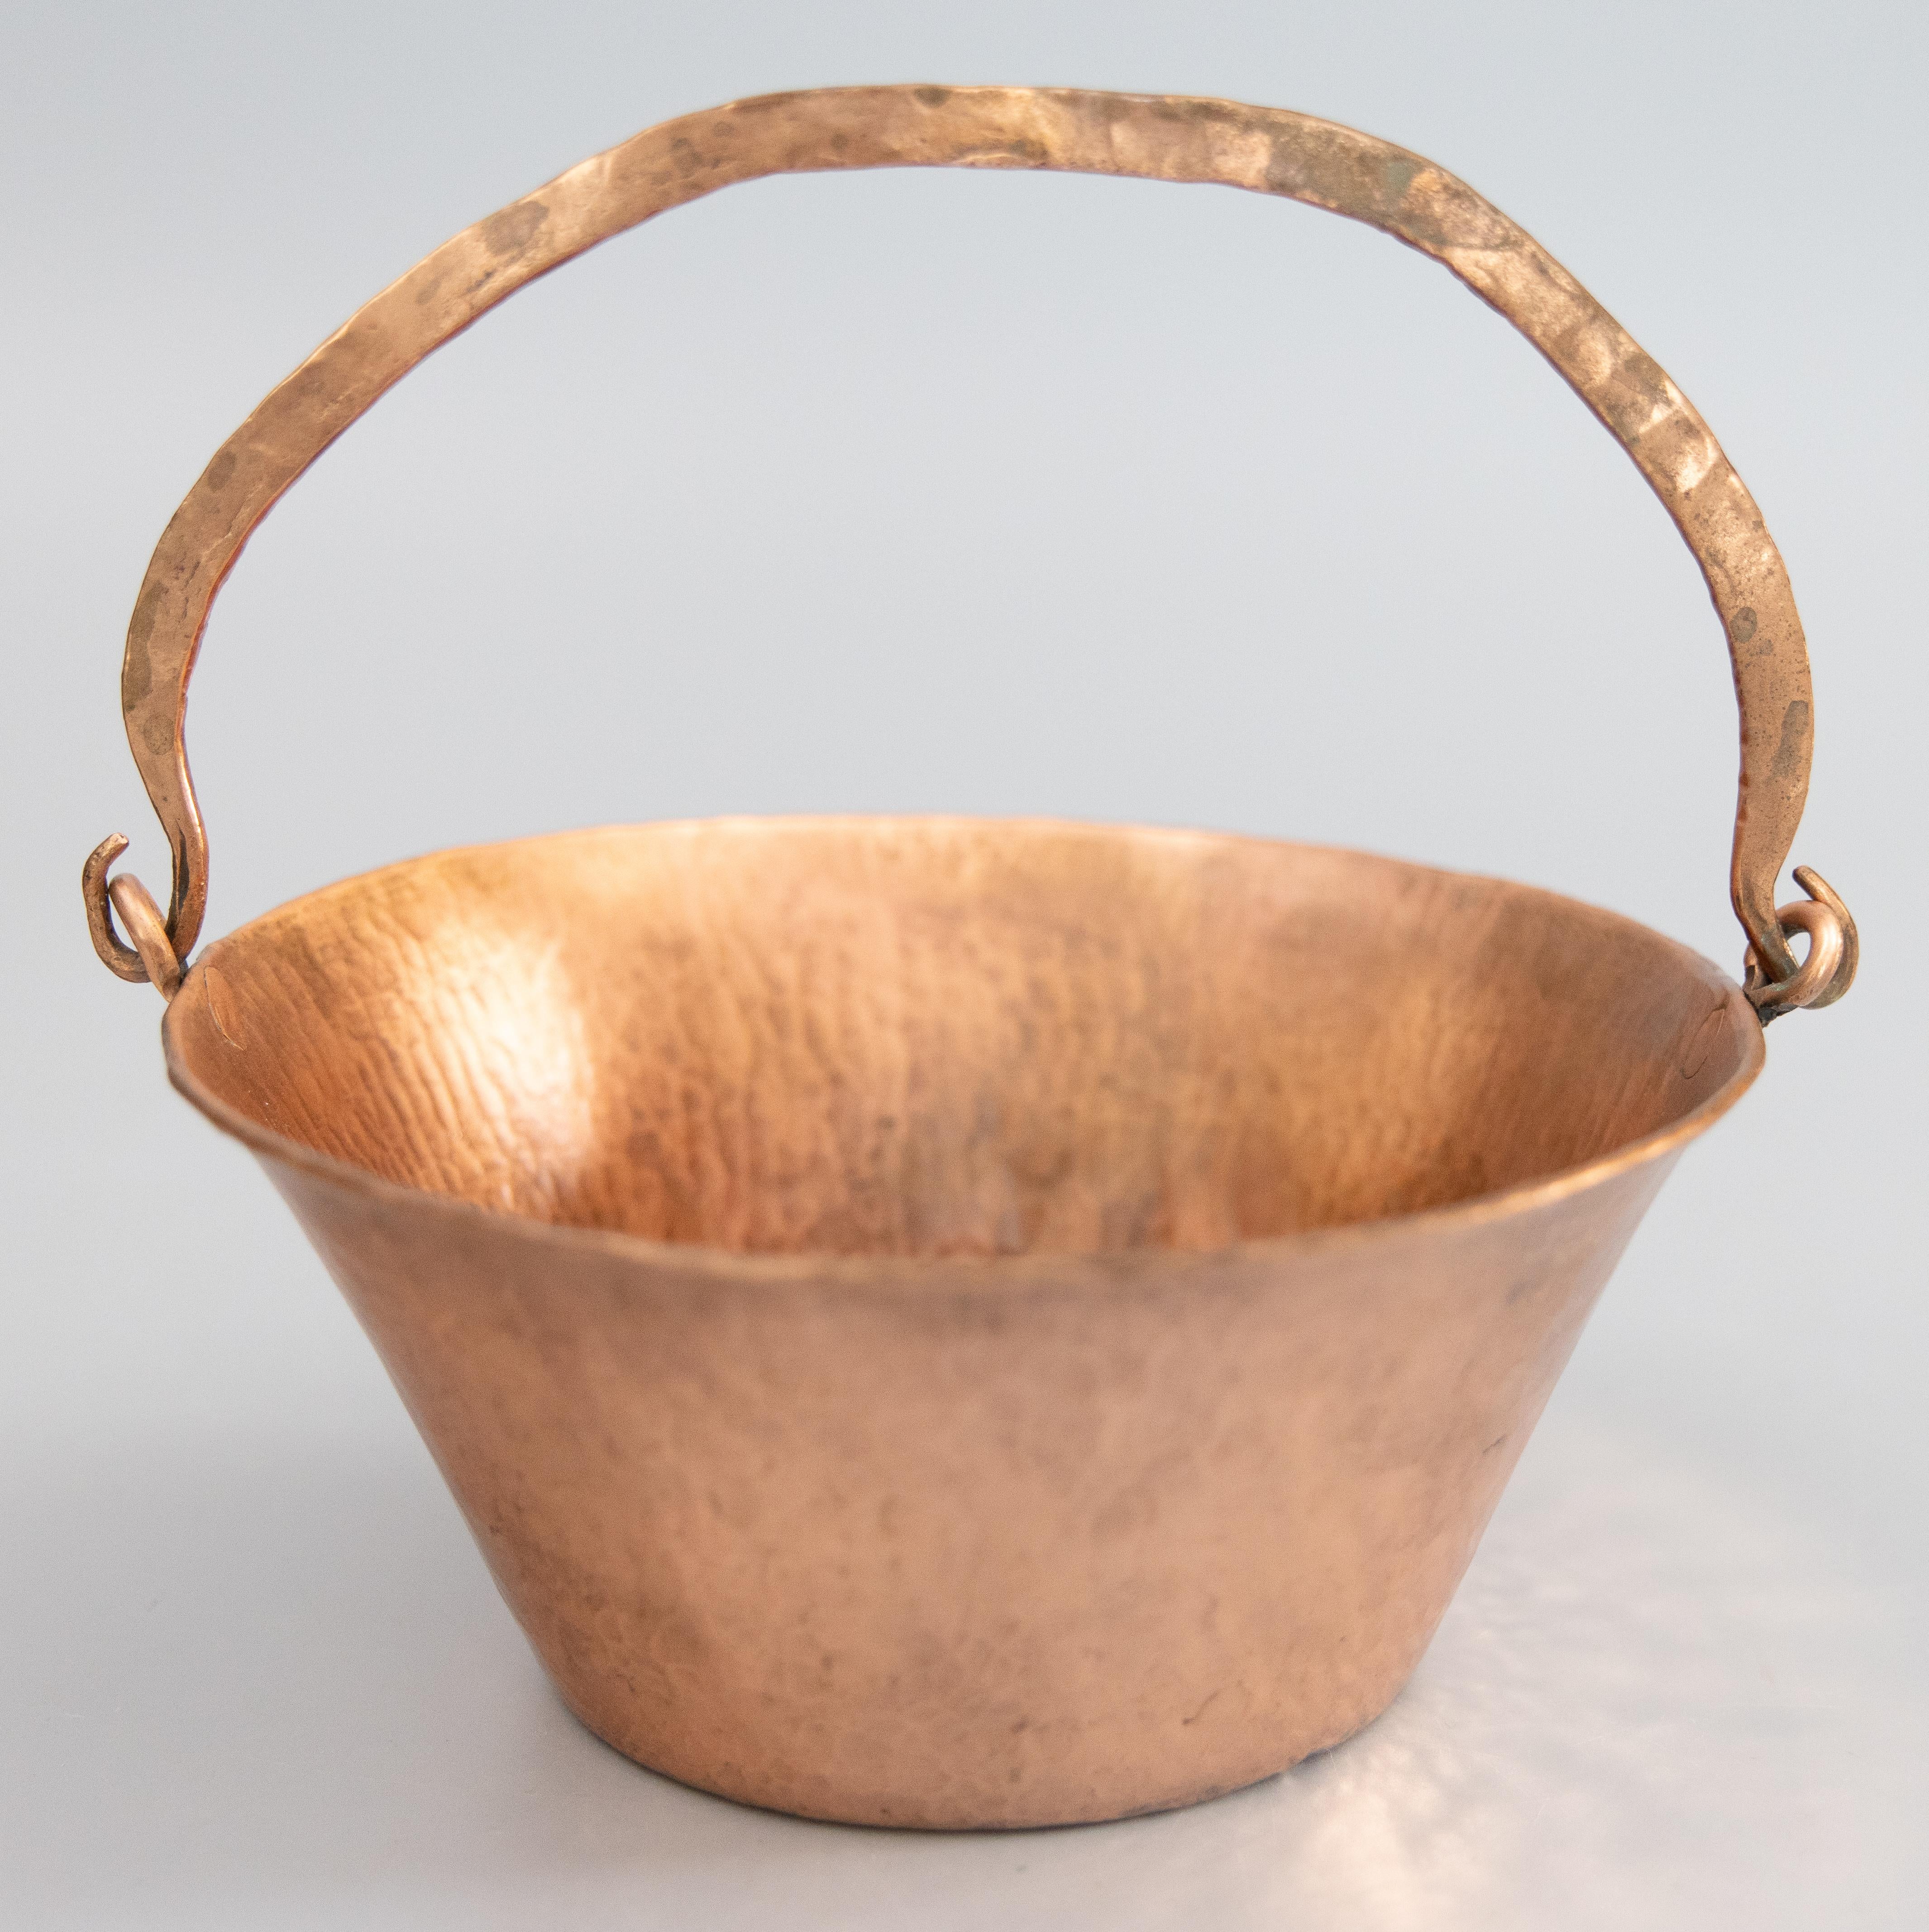 A gorgeous antique early 20th-Century hand-hammered petite French copper planter or hanging basket with a swing handle and a lovely patina. Perfect for greenery or small decorative objects to brighten your kitchen or living space. The height with